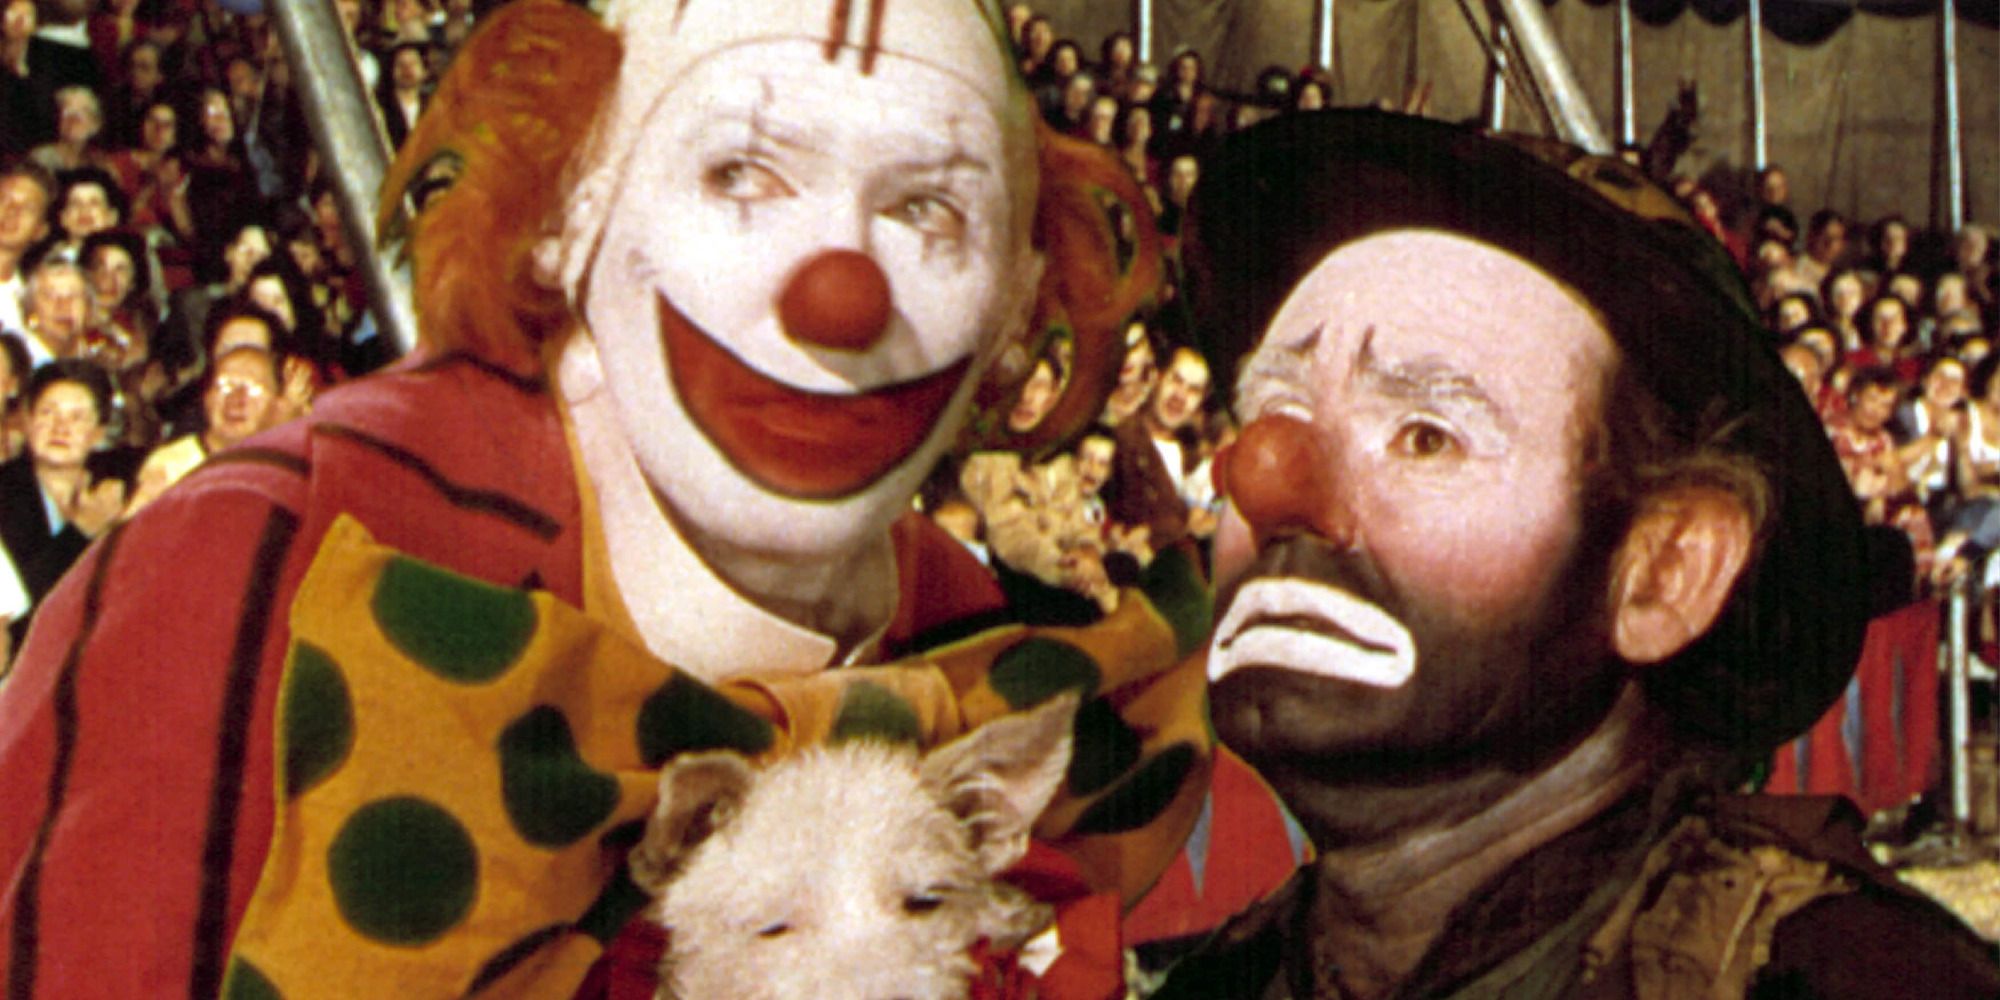 clowns in a circus performance from 